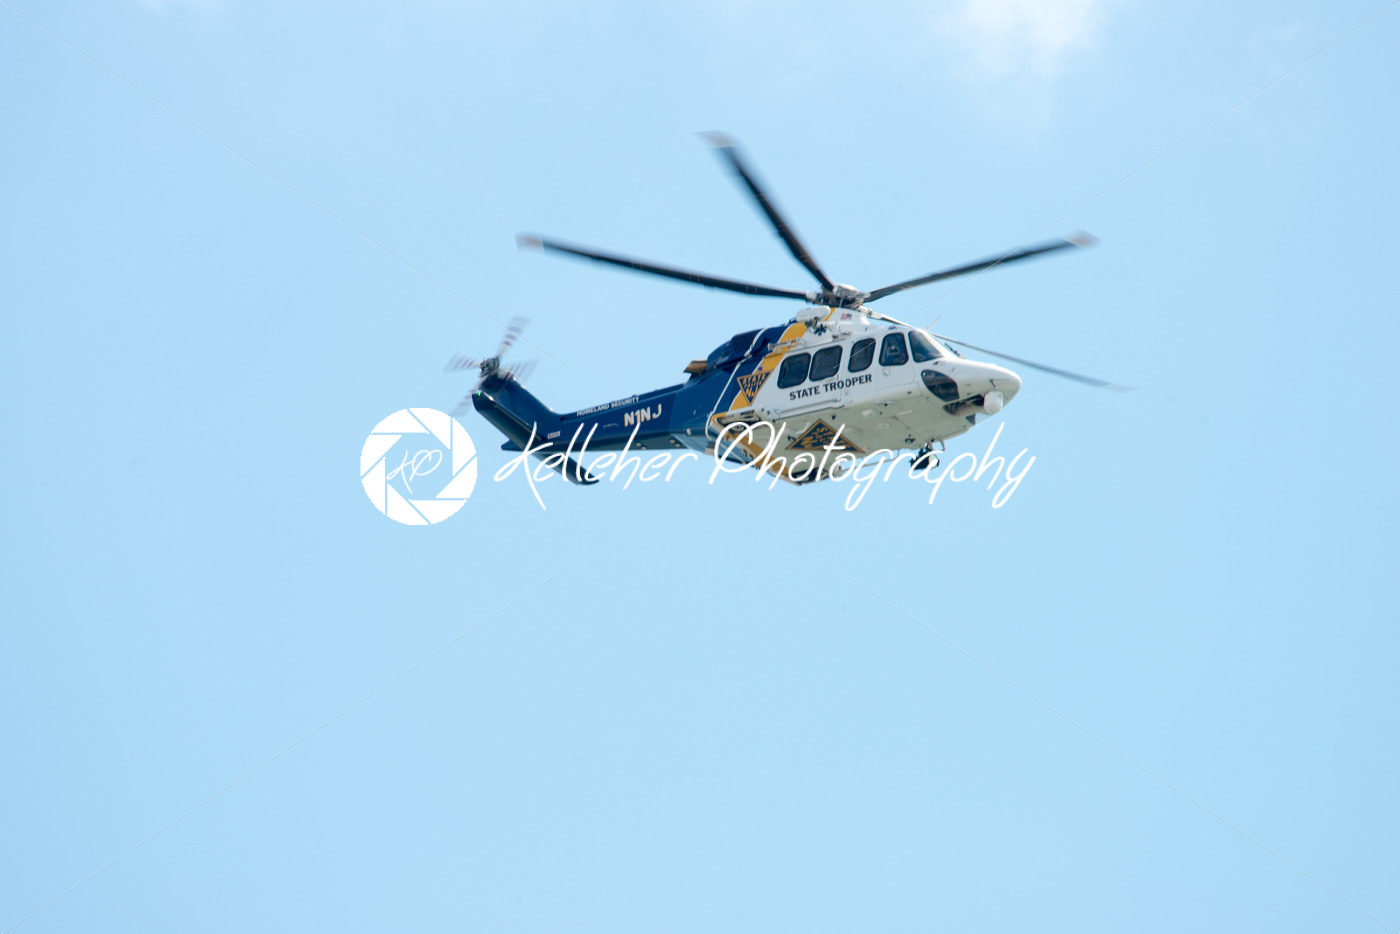 ATLANTIC CITY, NJ – AUGUST 17: NJ State Police Trooper Helicopter at Annual Atlantic City Air Show on August 17, 2016 - Kelleher Photography Store